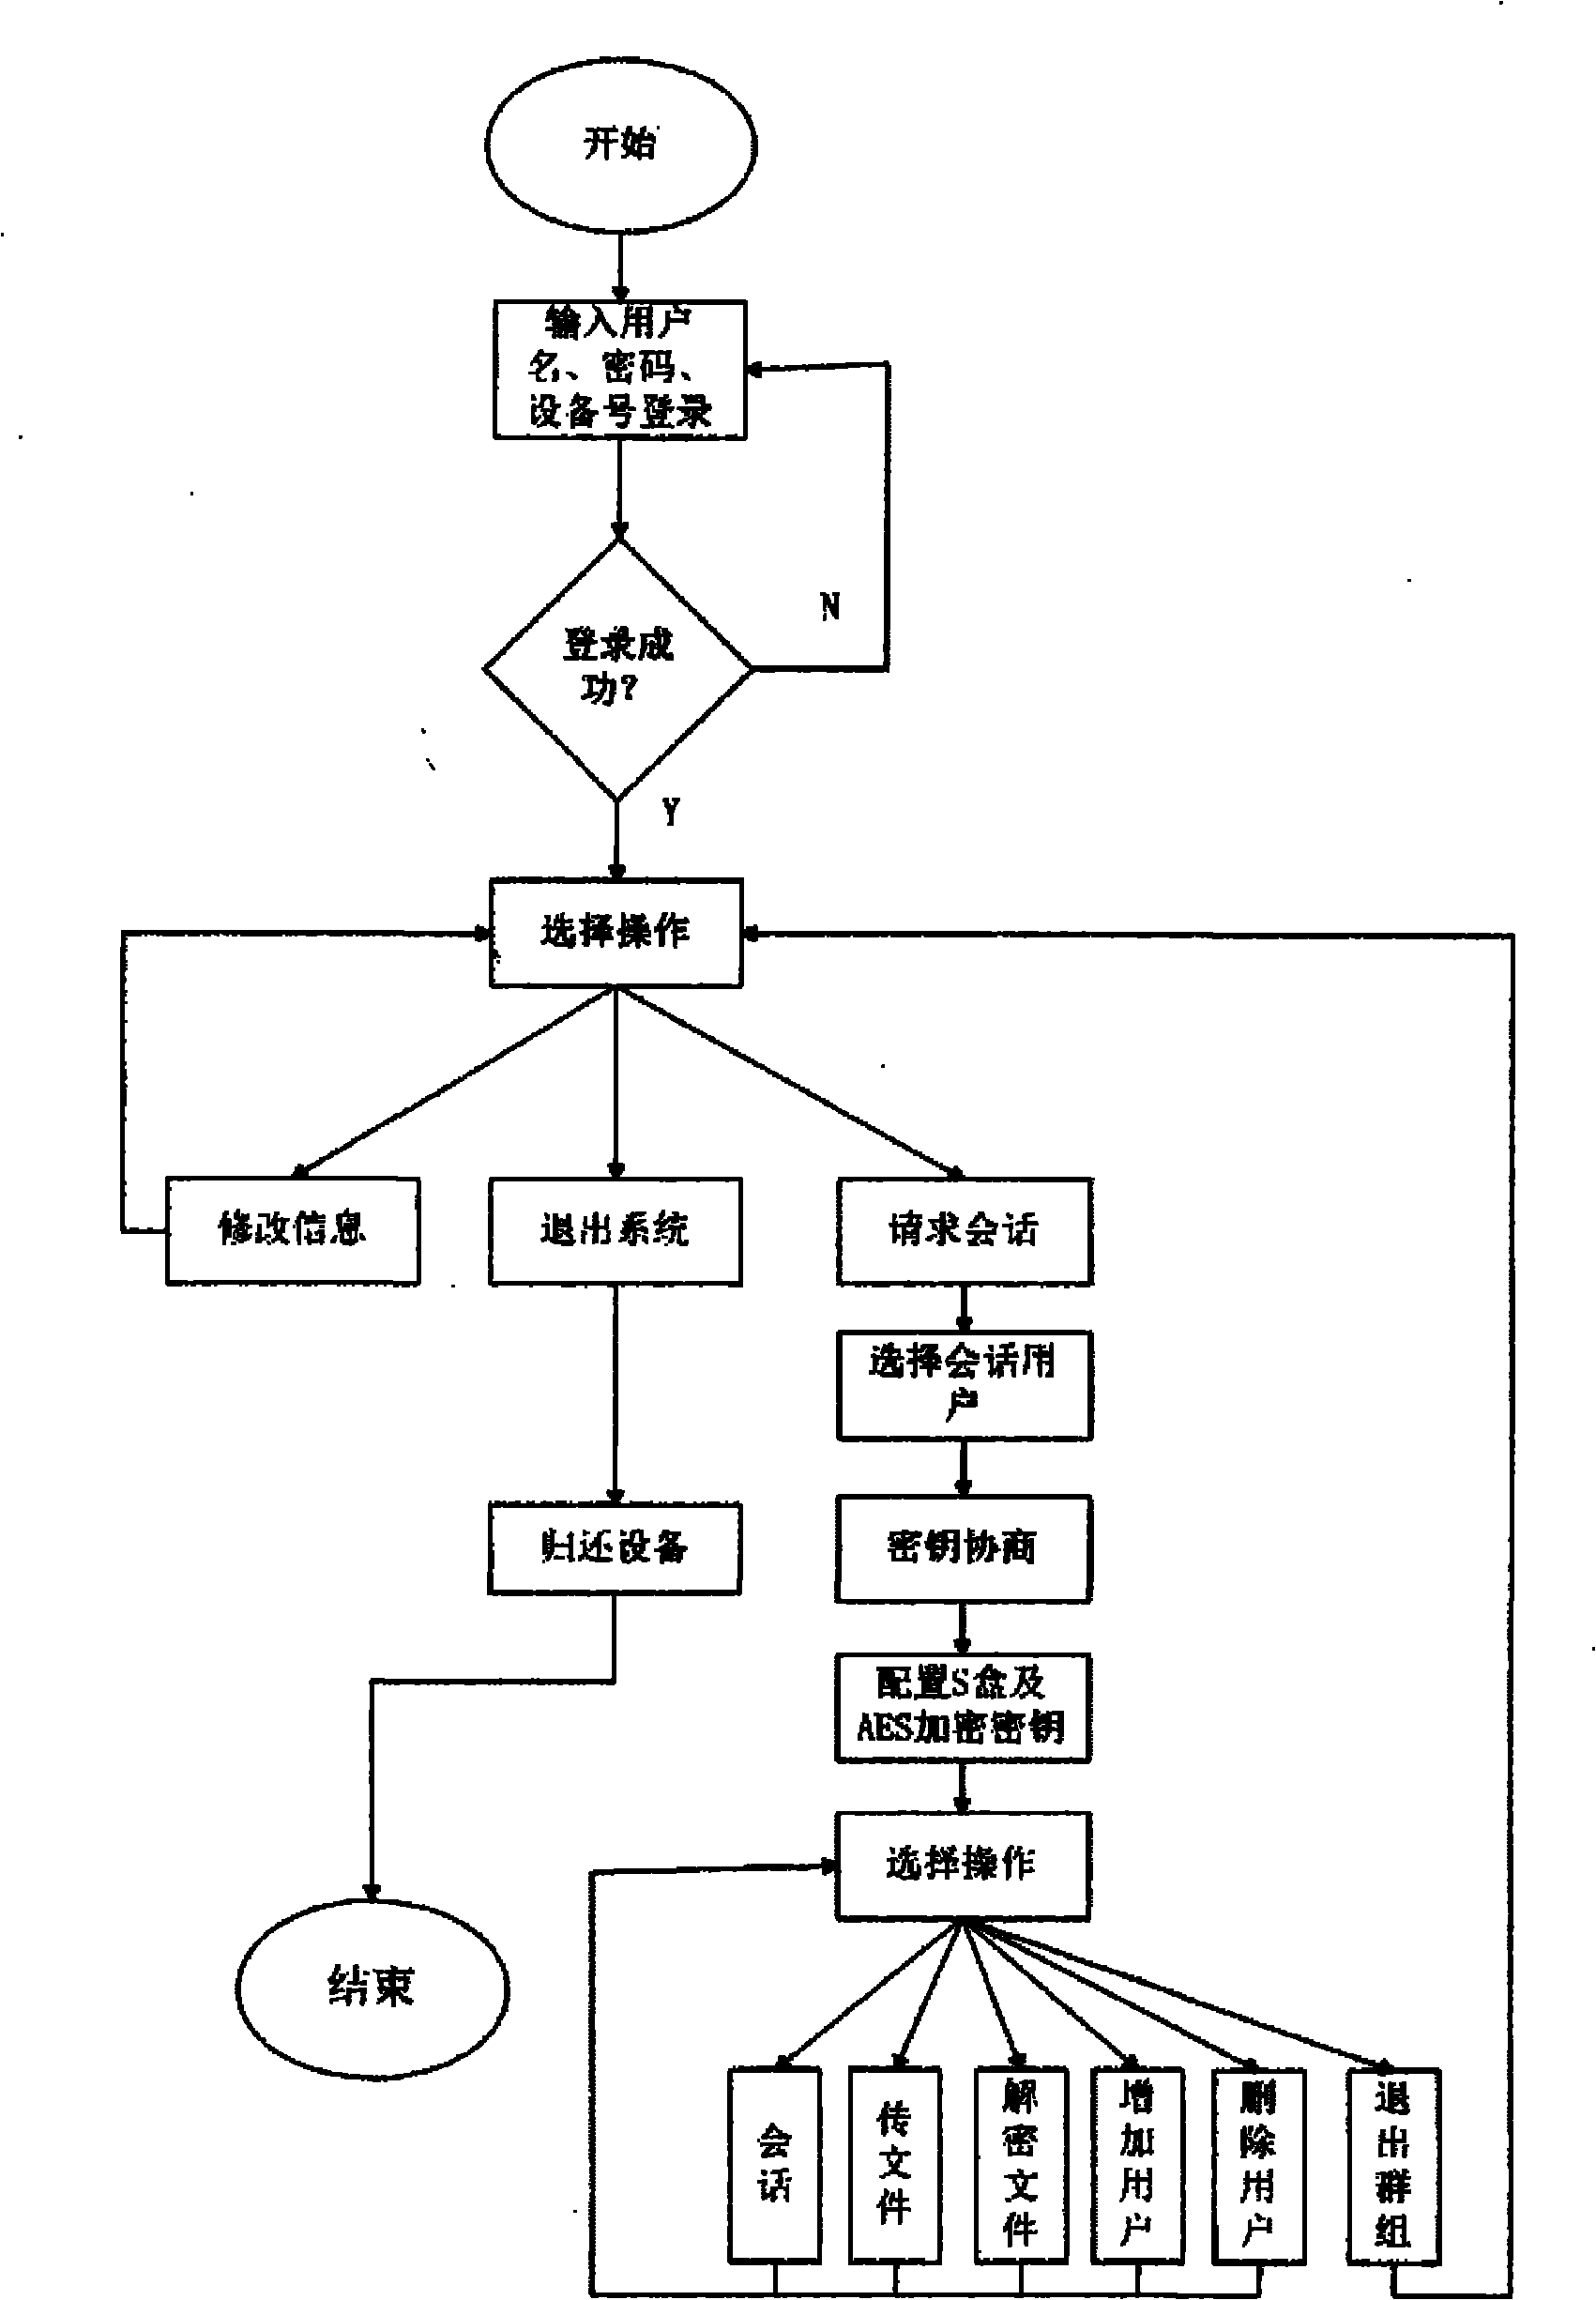 Dynamic password configuration based mobile communication method and system